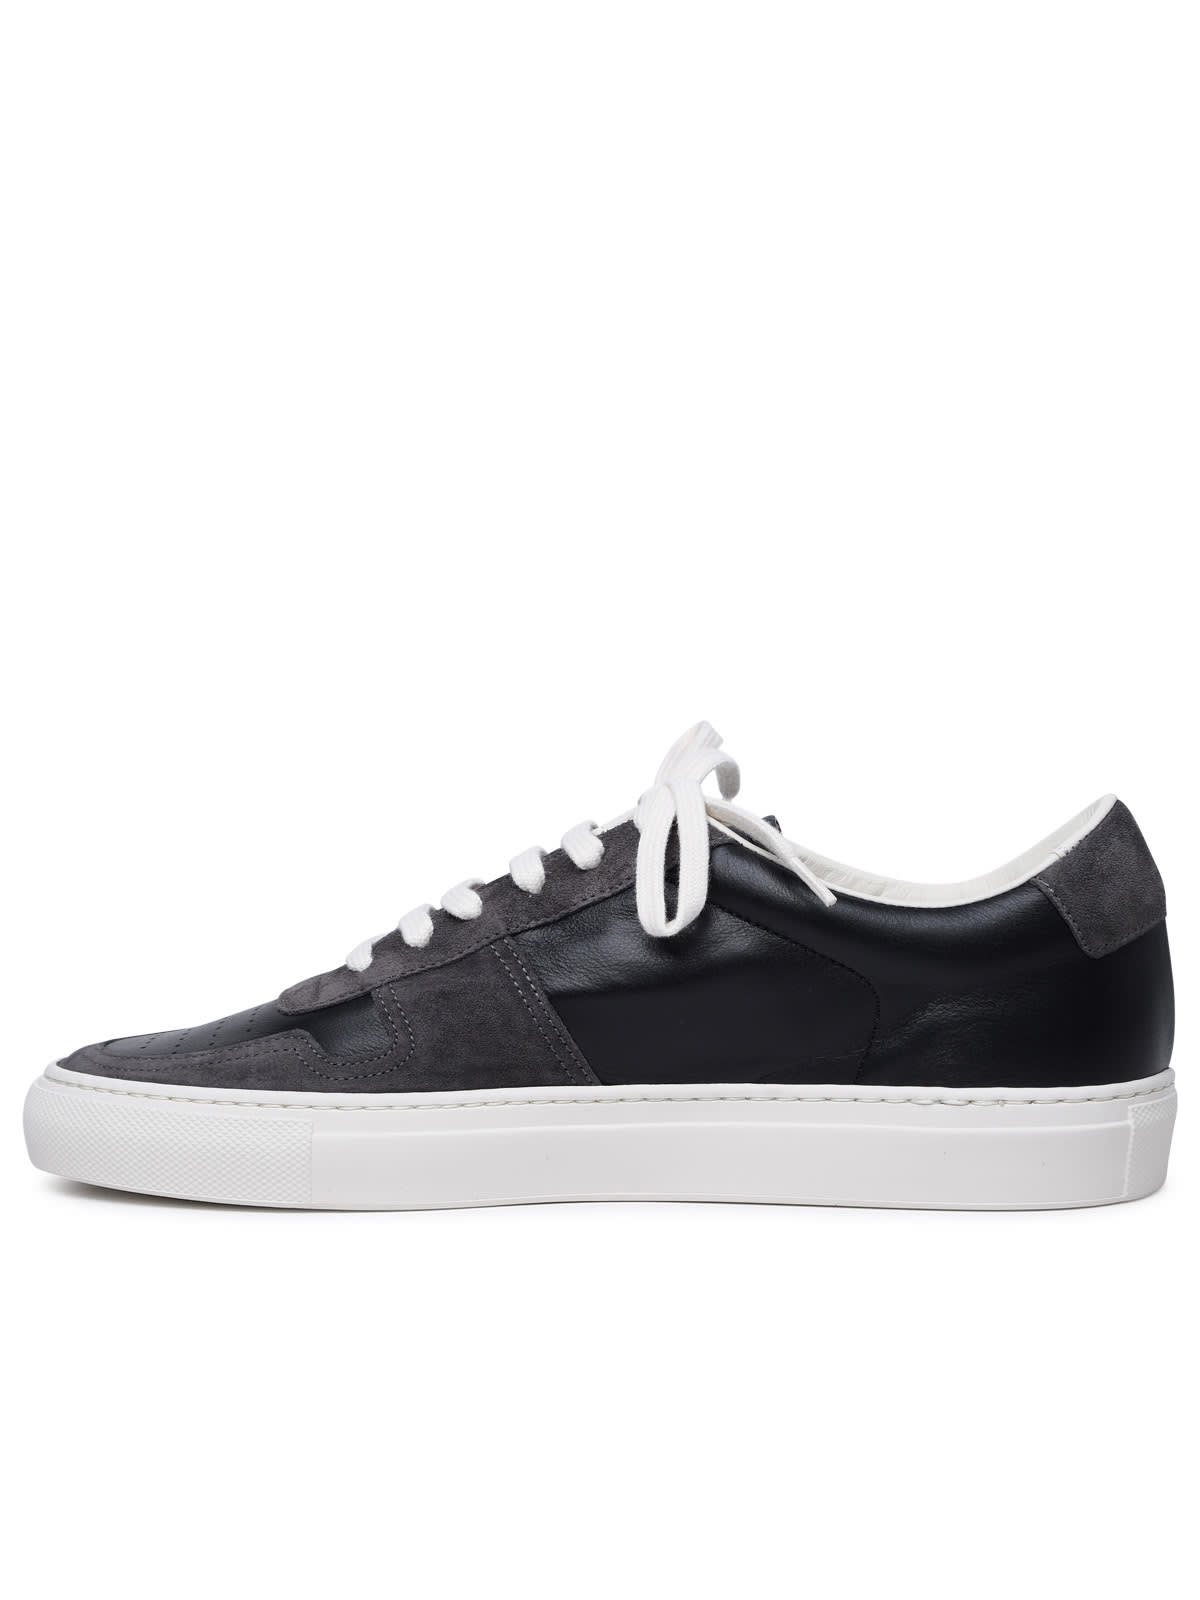 Shop Common Projects Bball Duo Black Leather Sneakers